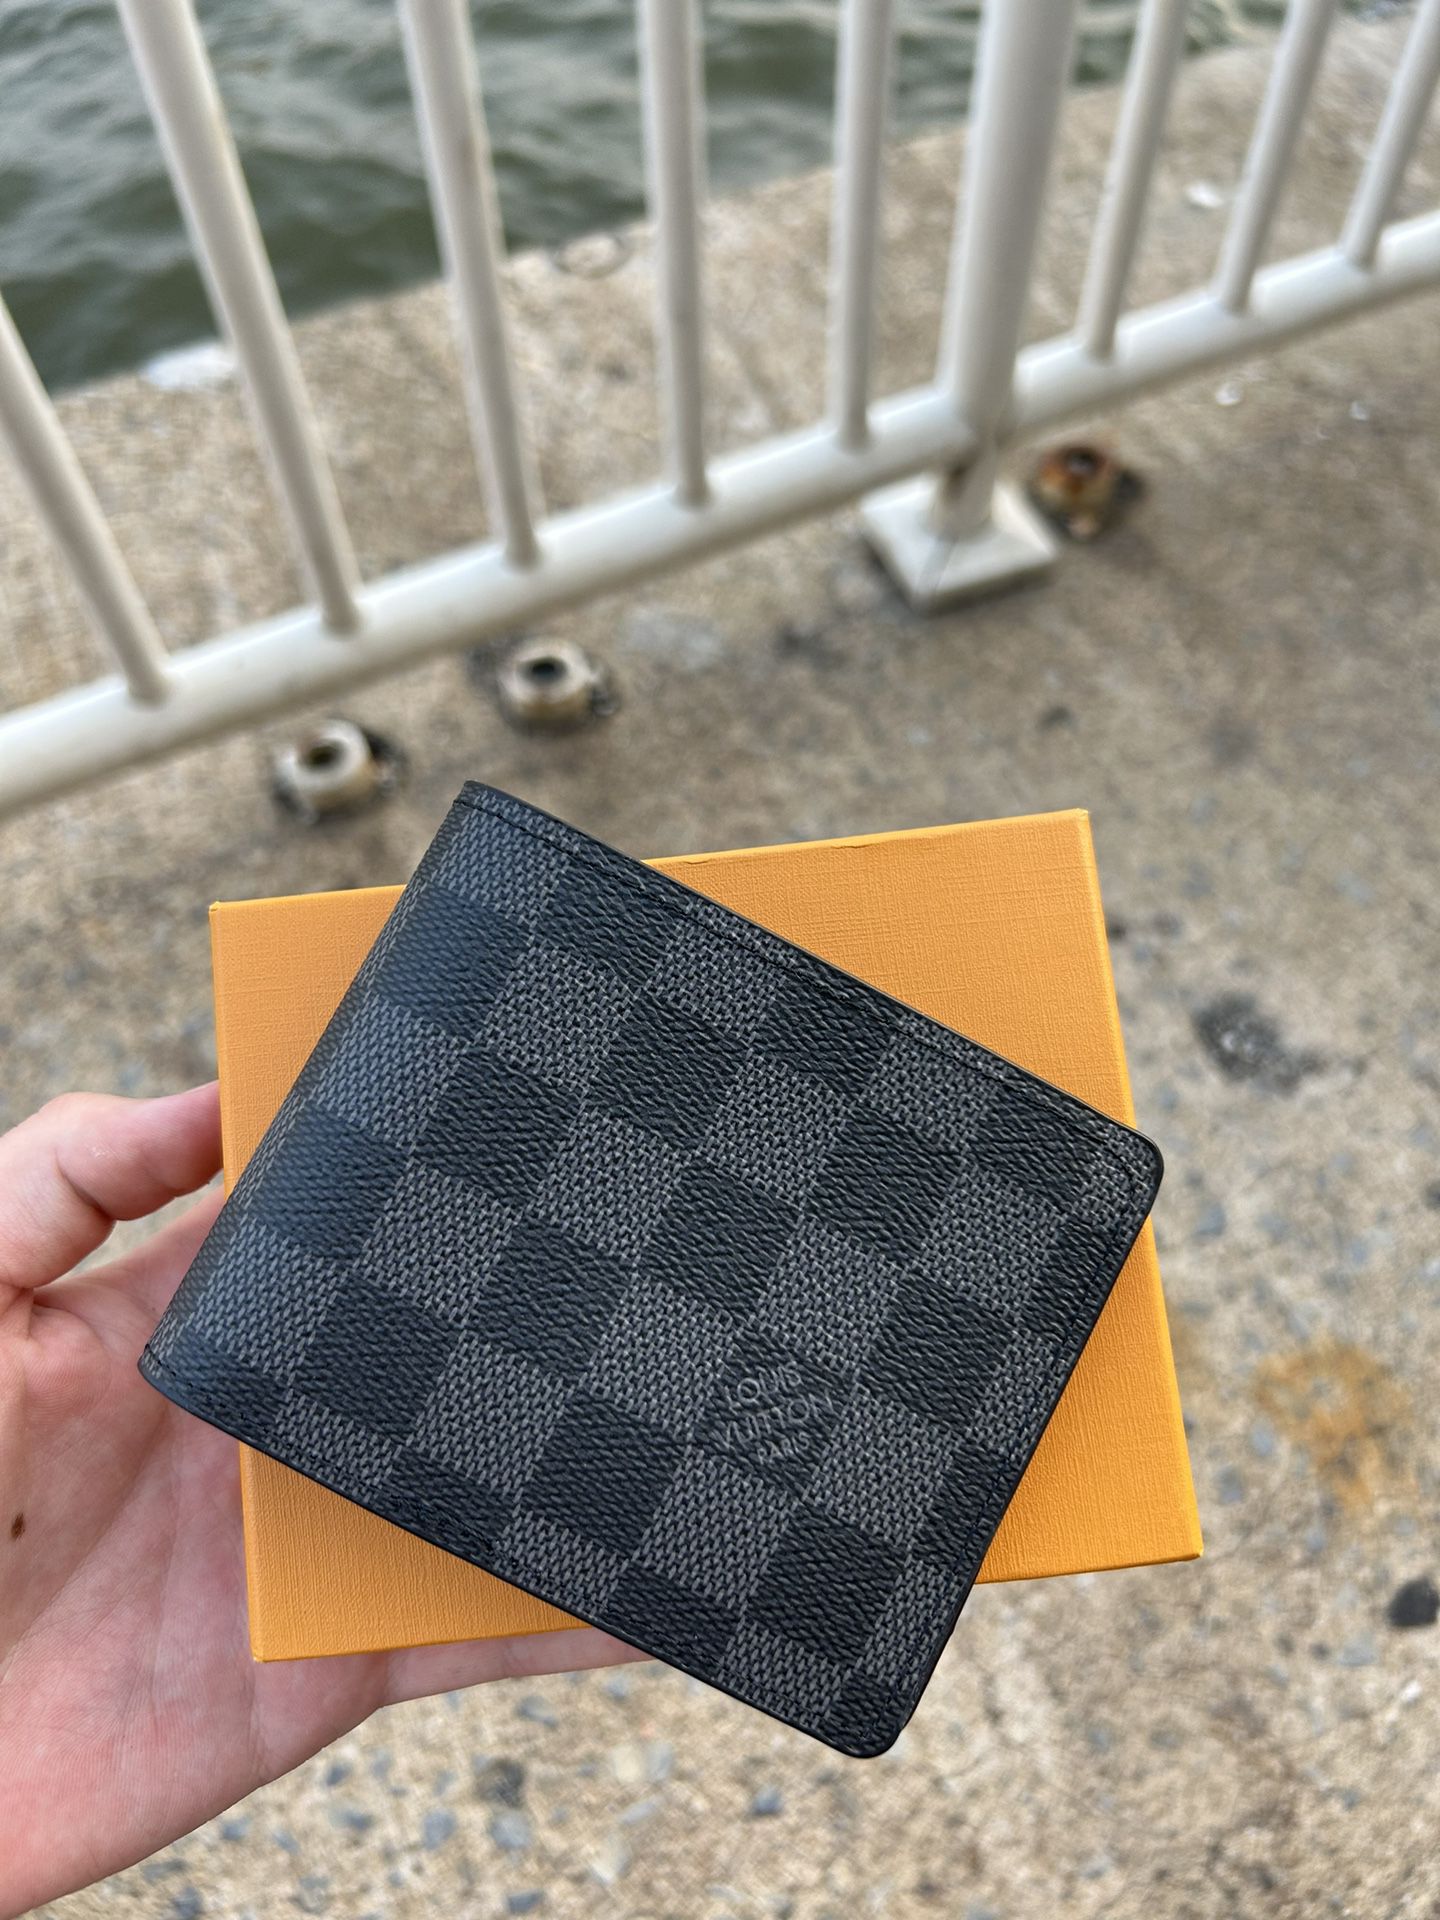 Black LV Men's Wallet With Box for Sale in Huntington, NY - OfferUp